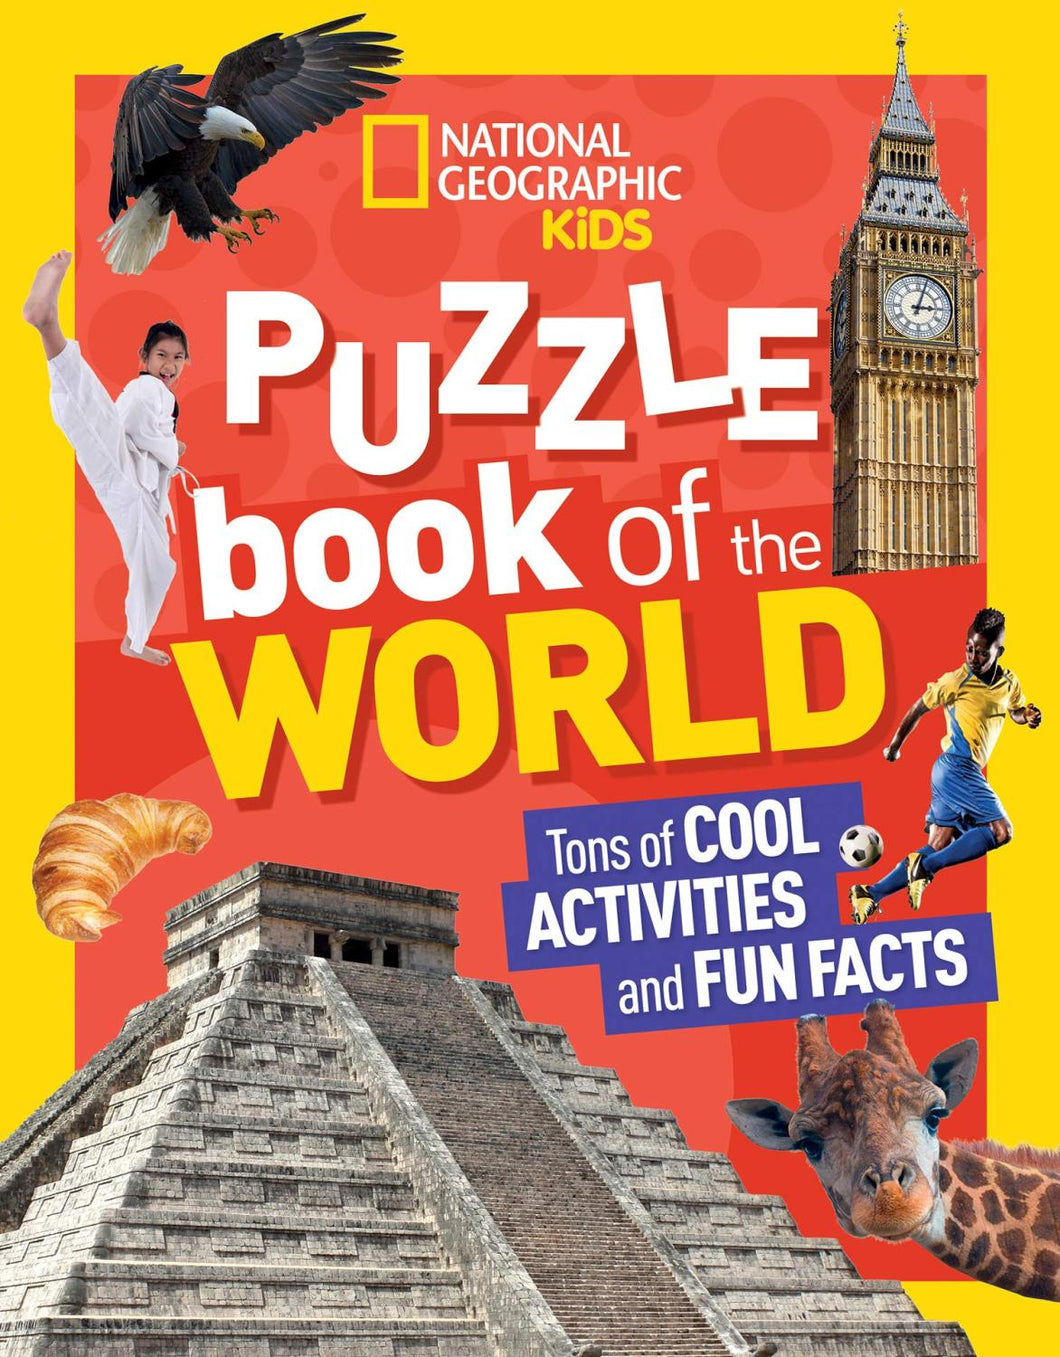 Kids Puzzle Book of the World by National Geographic